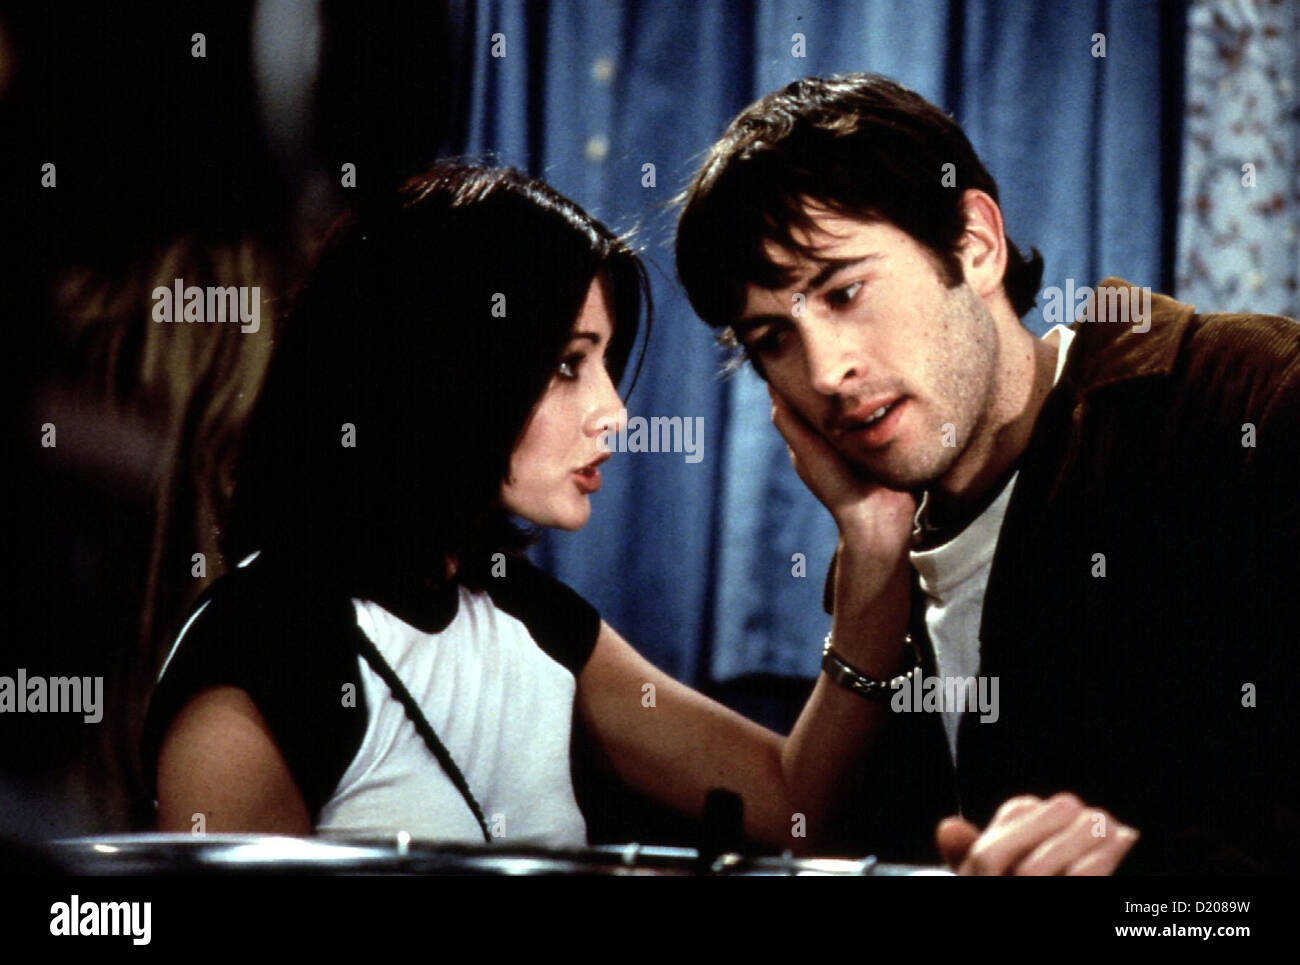 Mall Rats   Mall Rats   Rene (Shannen Doherty), Brodie (Jason Lee) *** Local Caption *** 1995  -- Stock Photo